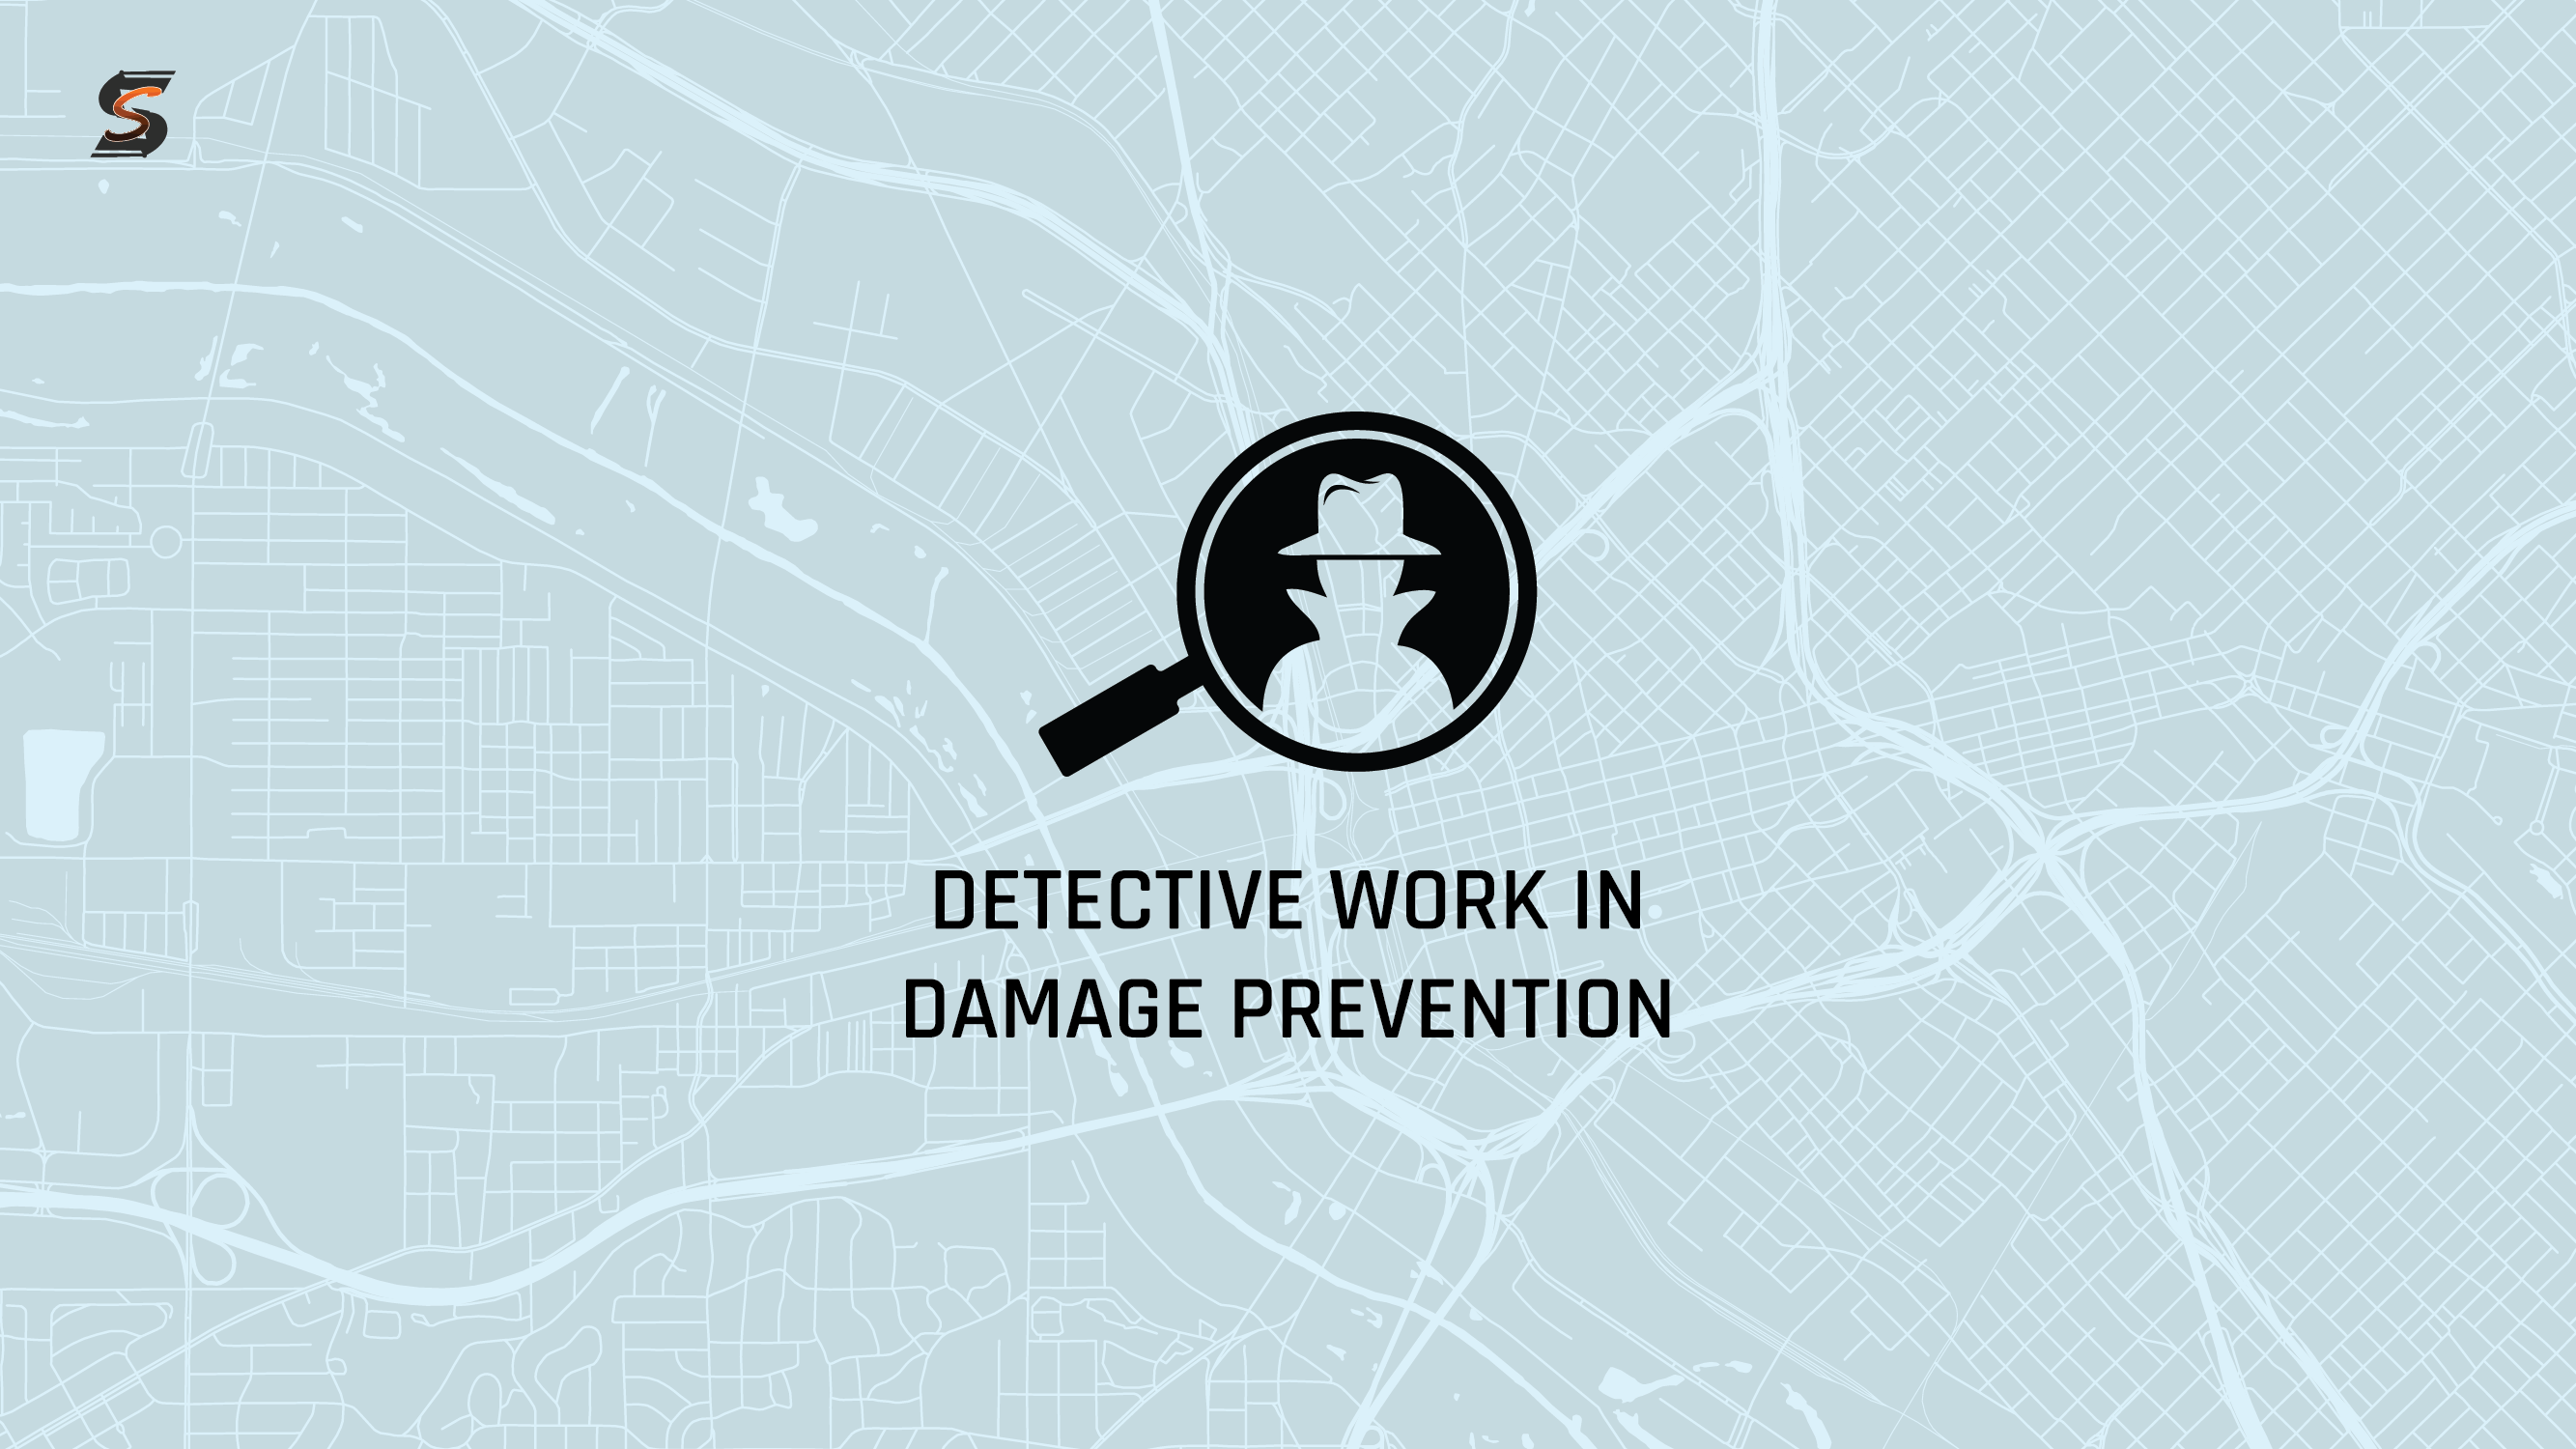 Featured image for “DETECTIVE WORK IN DAMAGE PREVENTION”